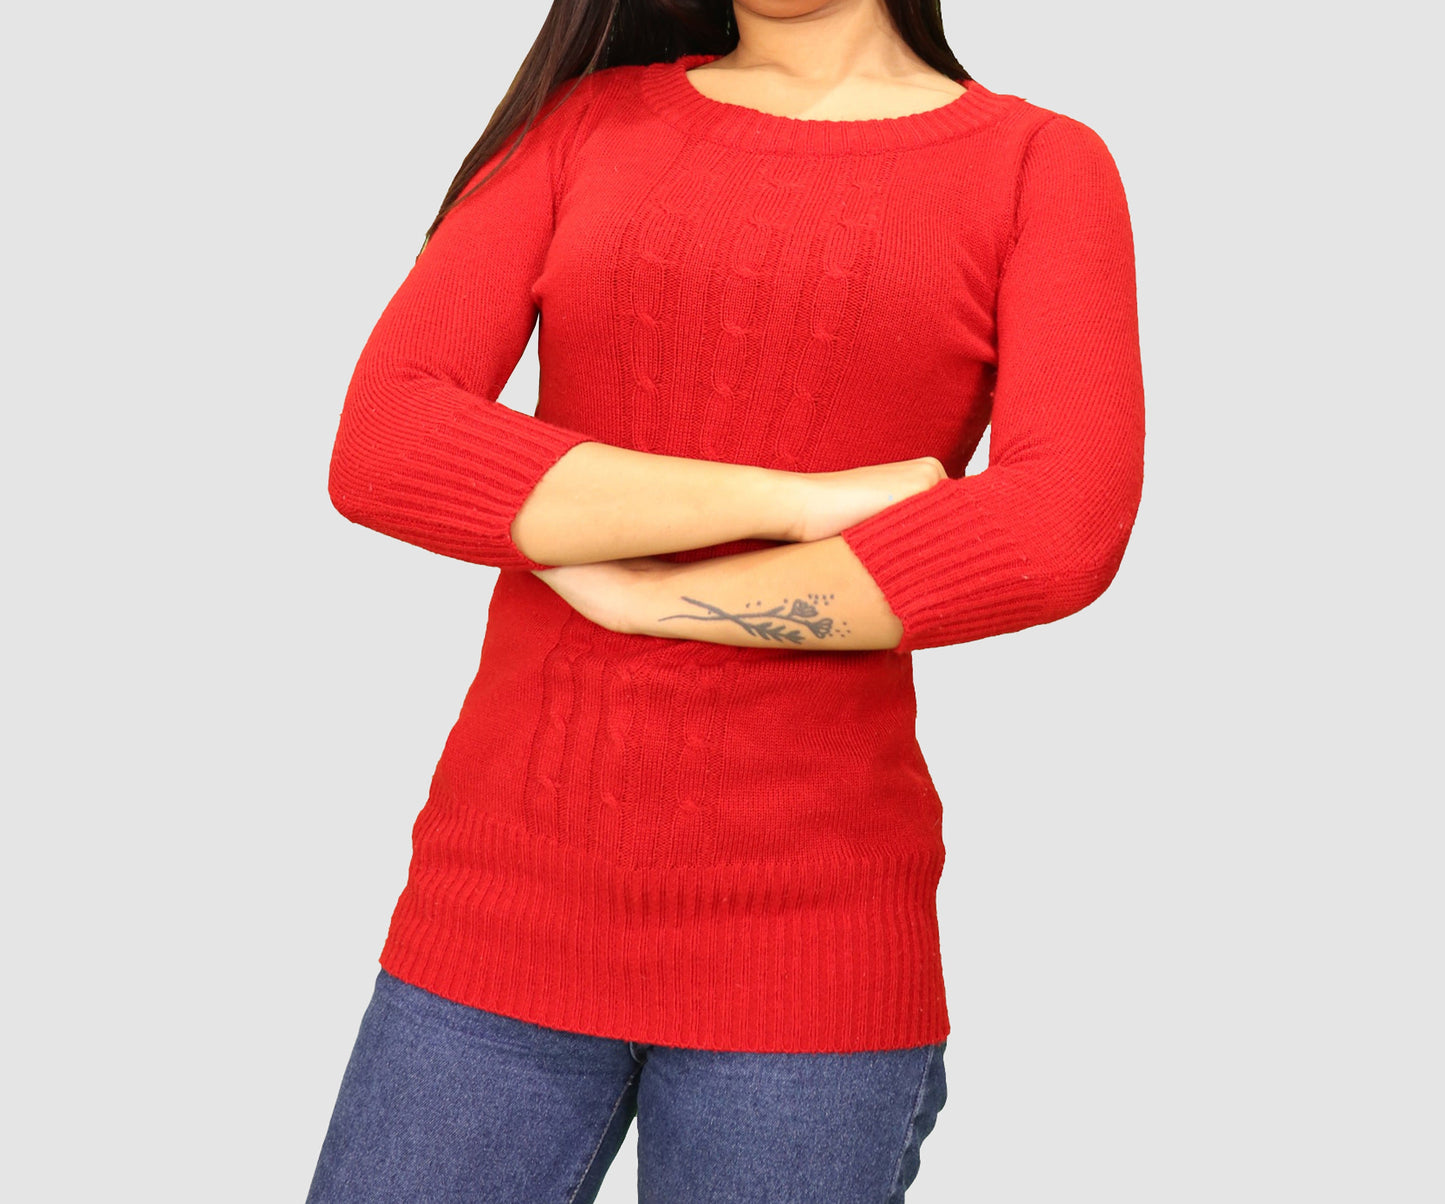 My Michelle Womens Tops Large / Red Wool Three Quarter Sleeve Top